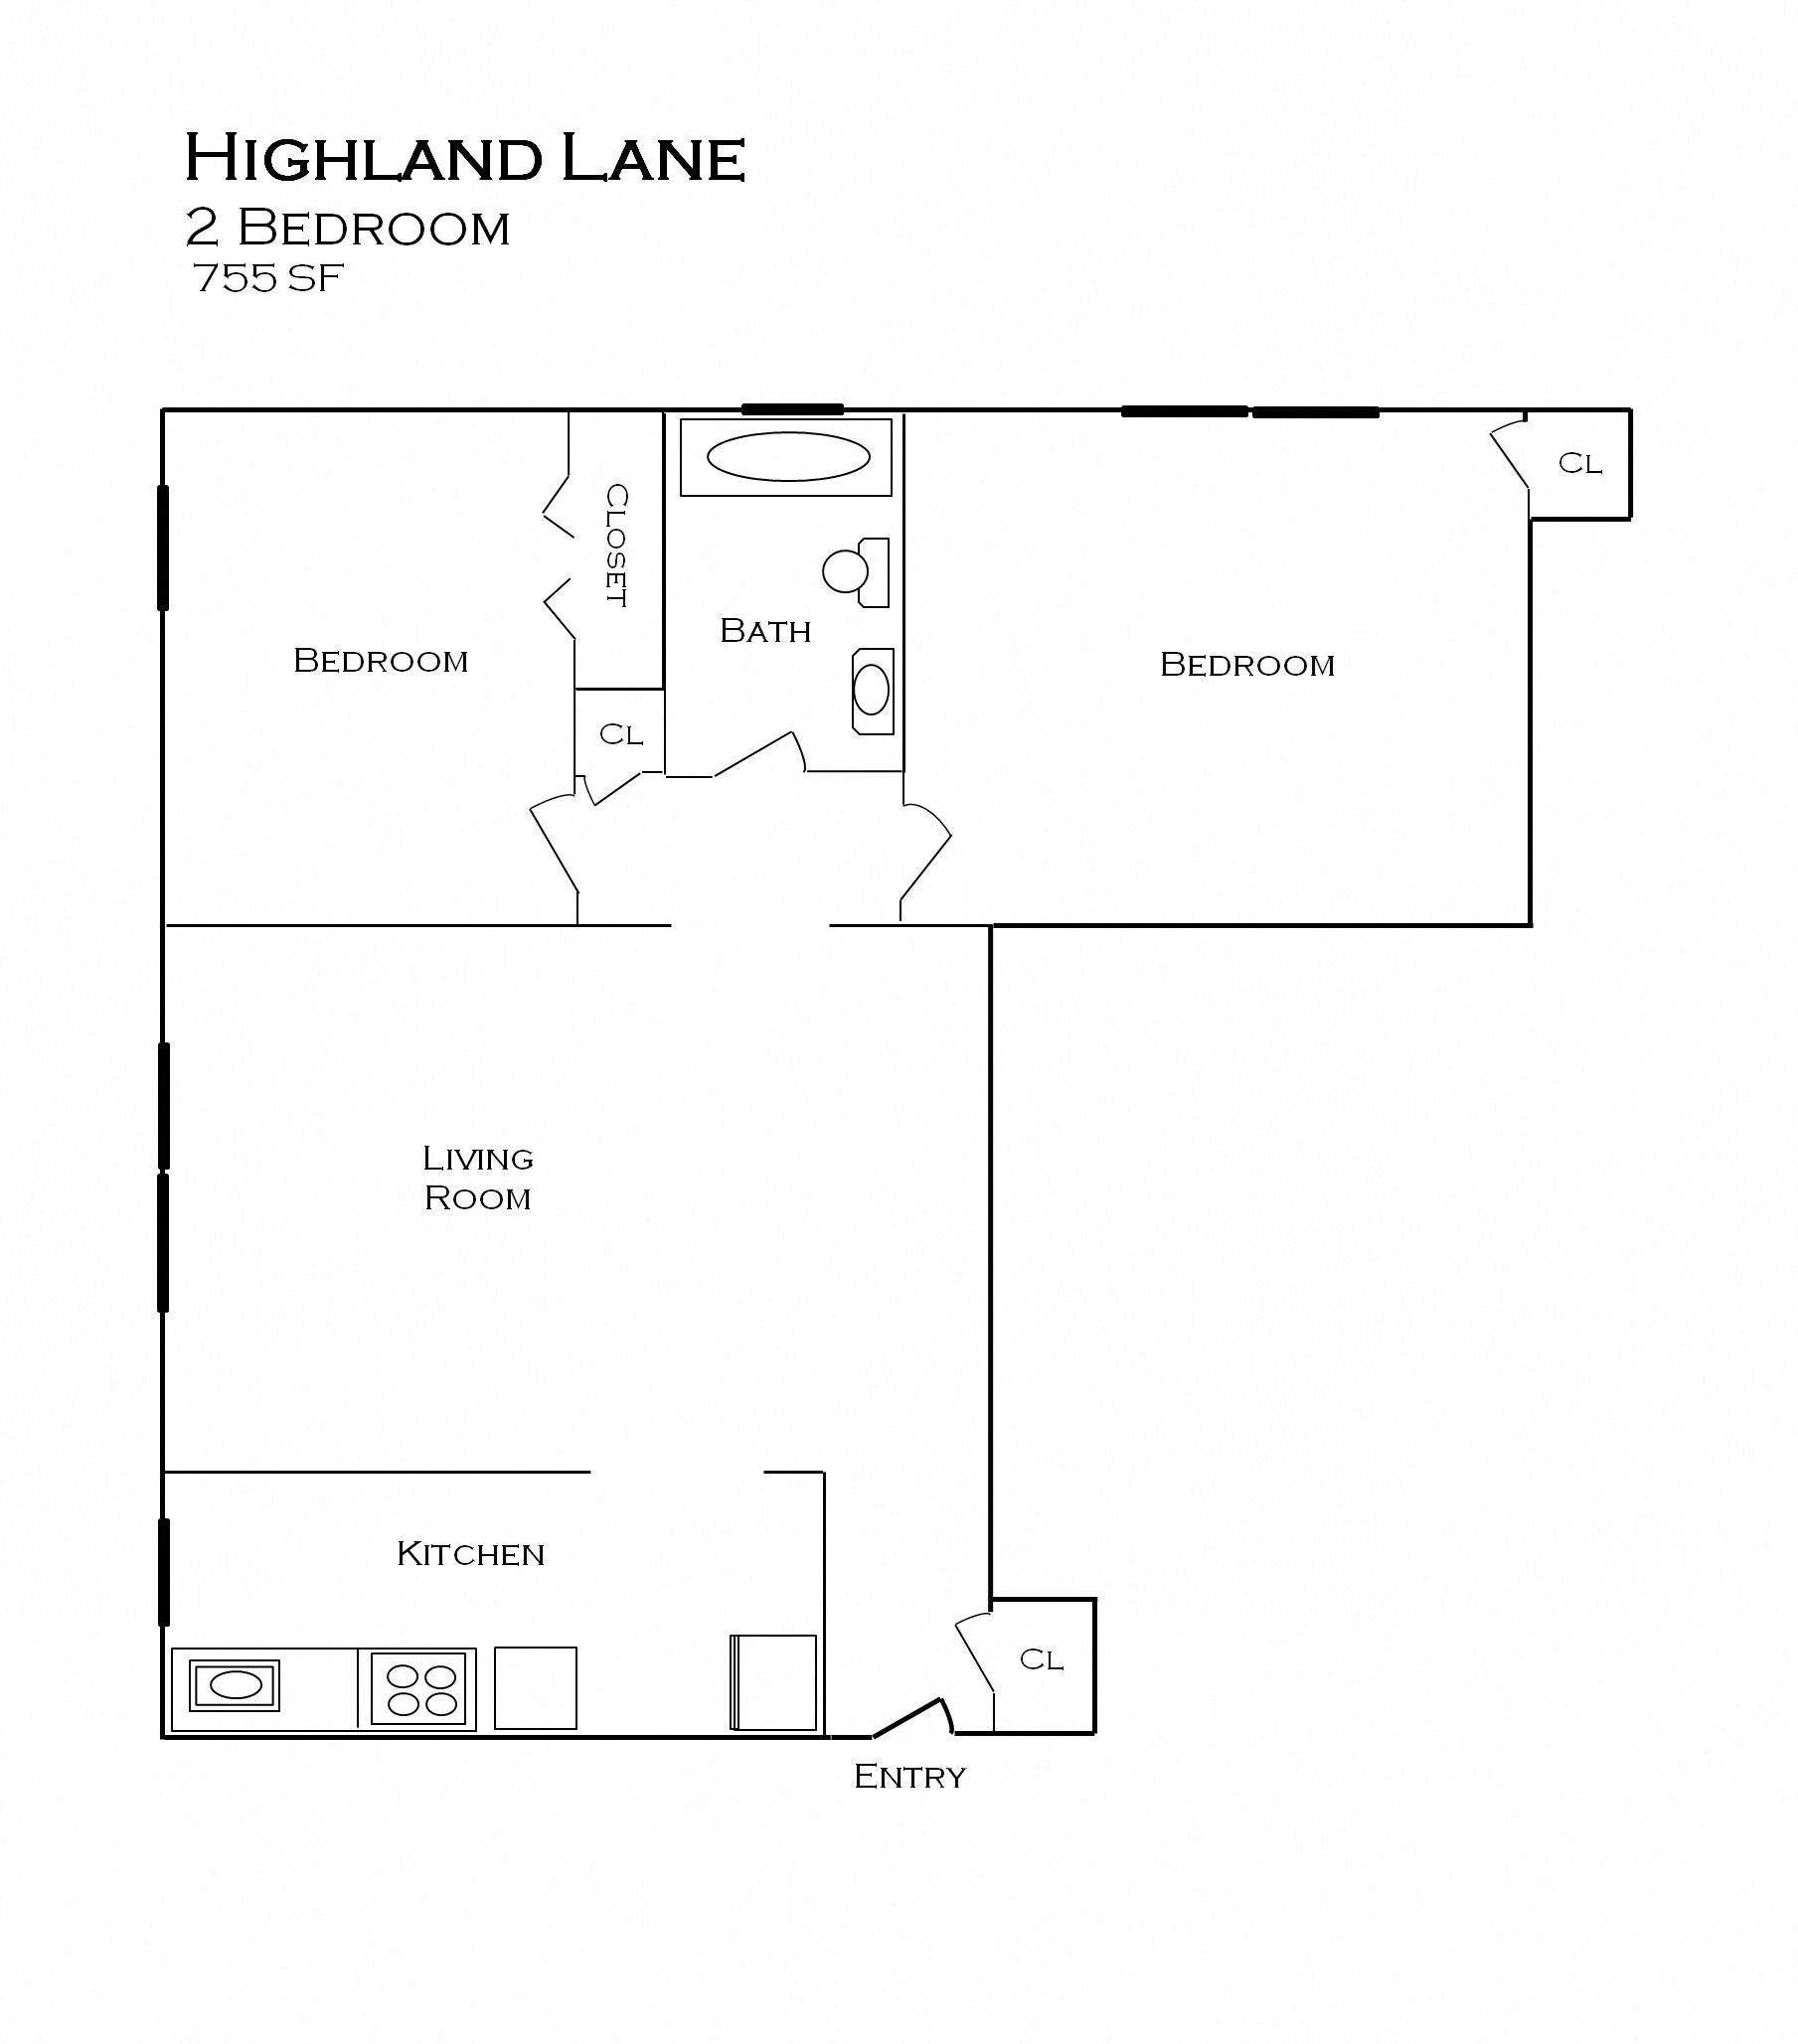 Floor Plans of Highland Lane Apartments in St. Paul, MN